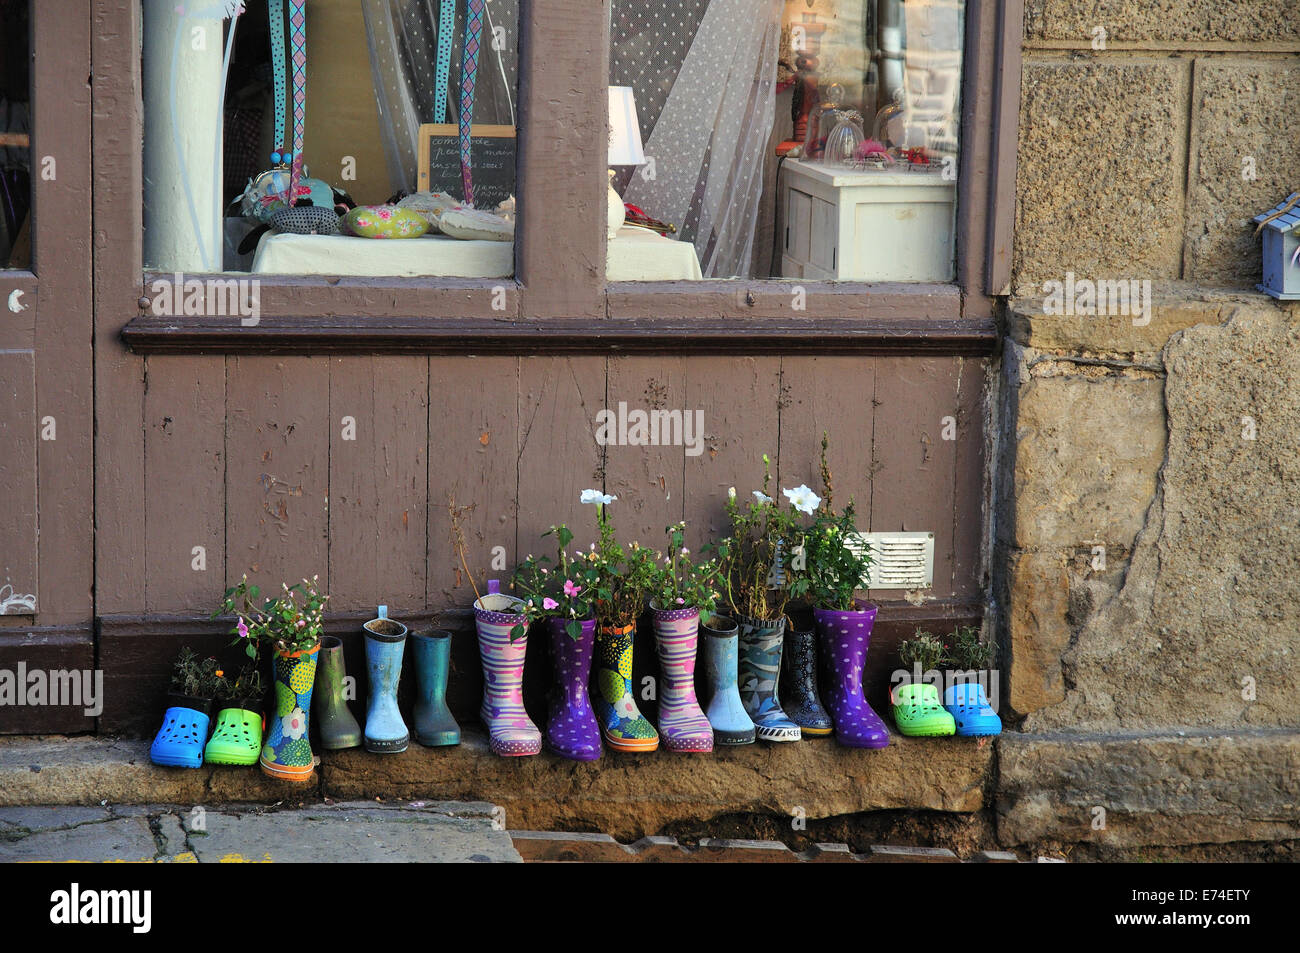 Wellingtons and shoes outside a shop in Estaing, France Stock Photo